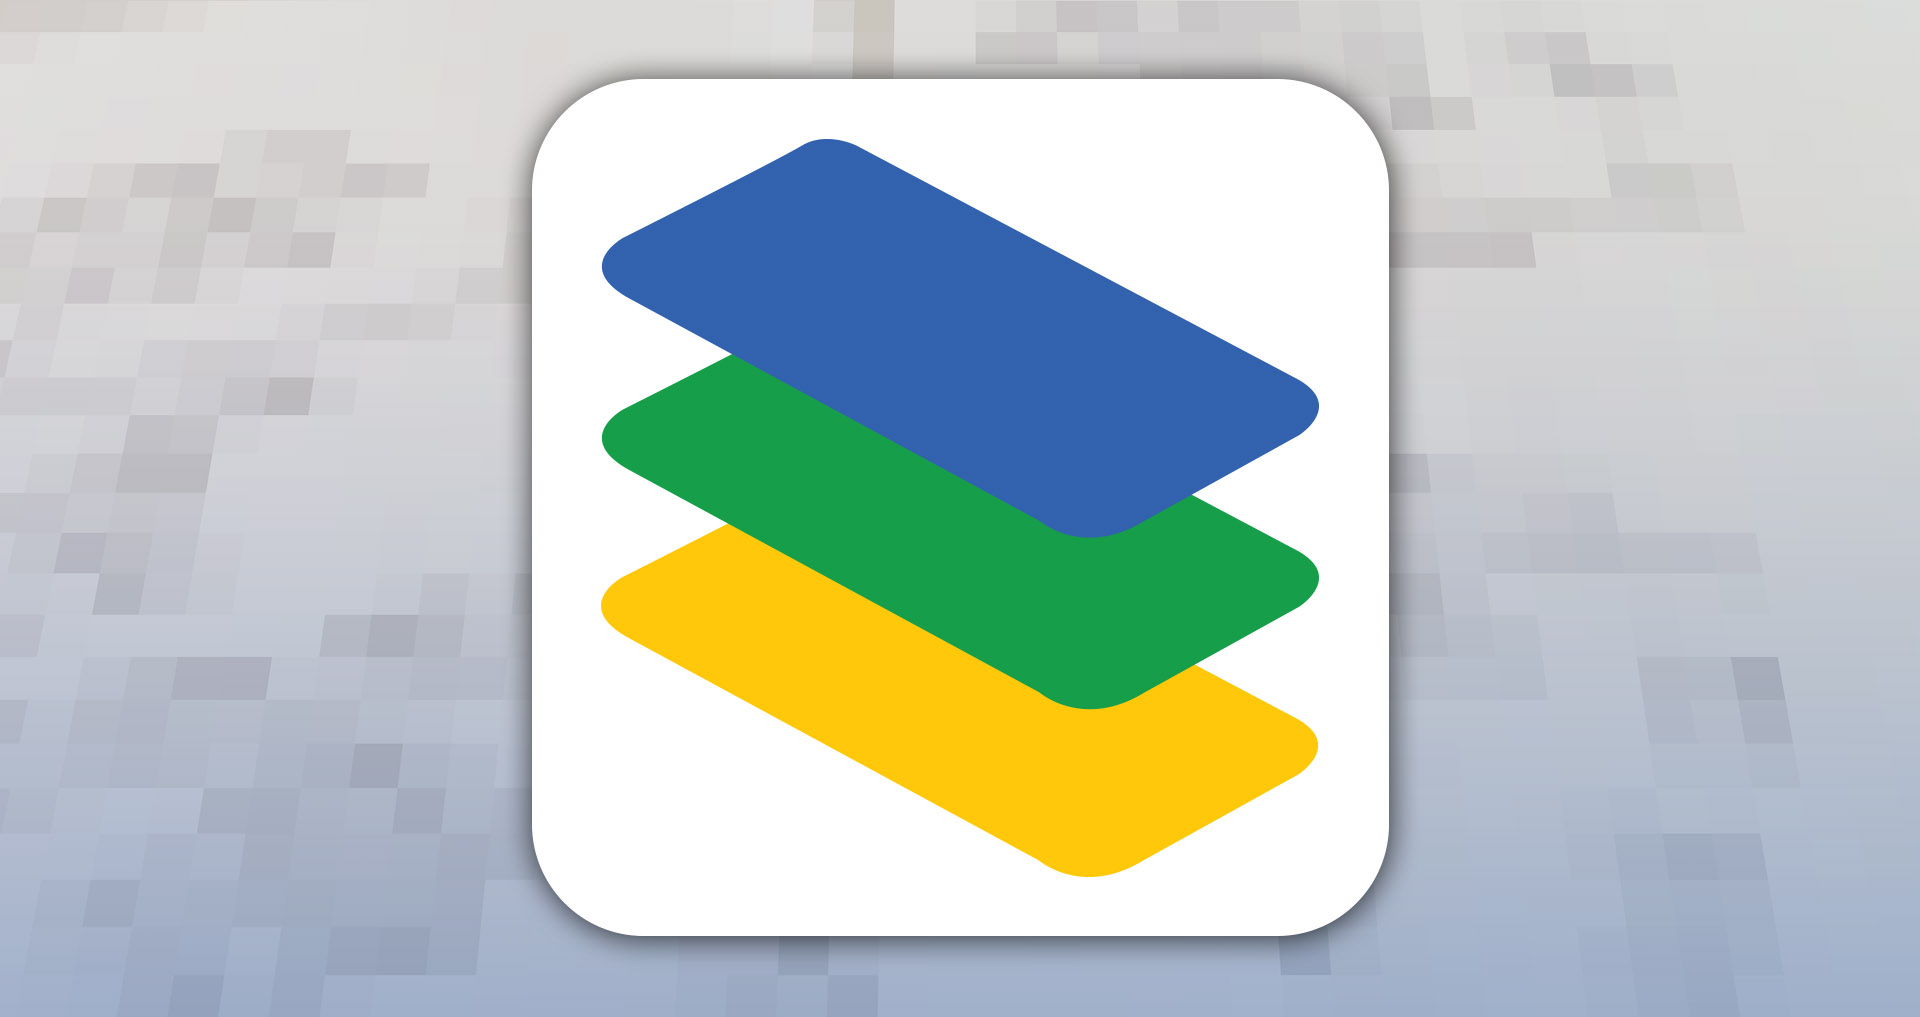 Stack is a sweet new document scanner application invented by Google